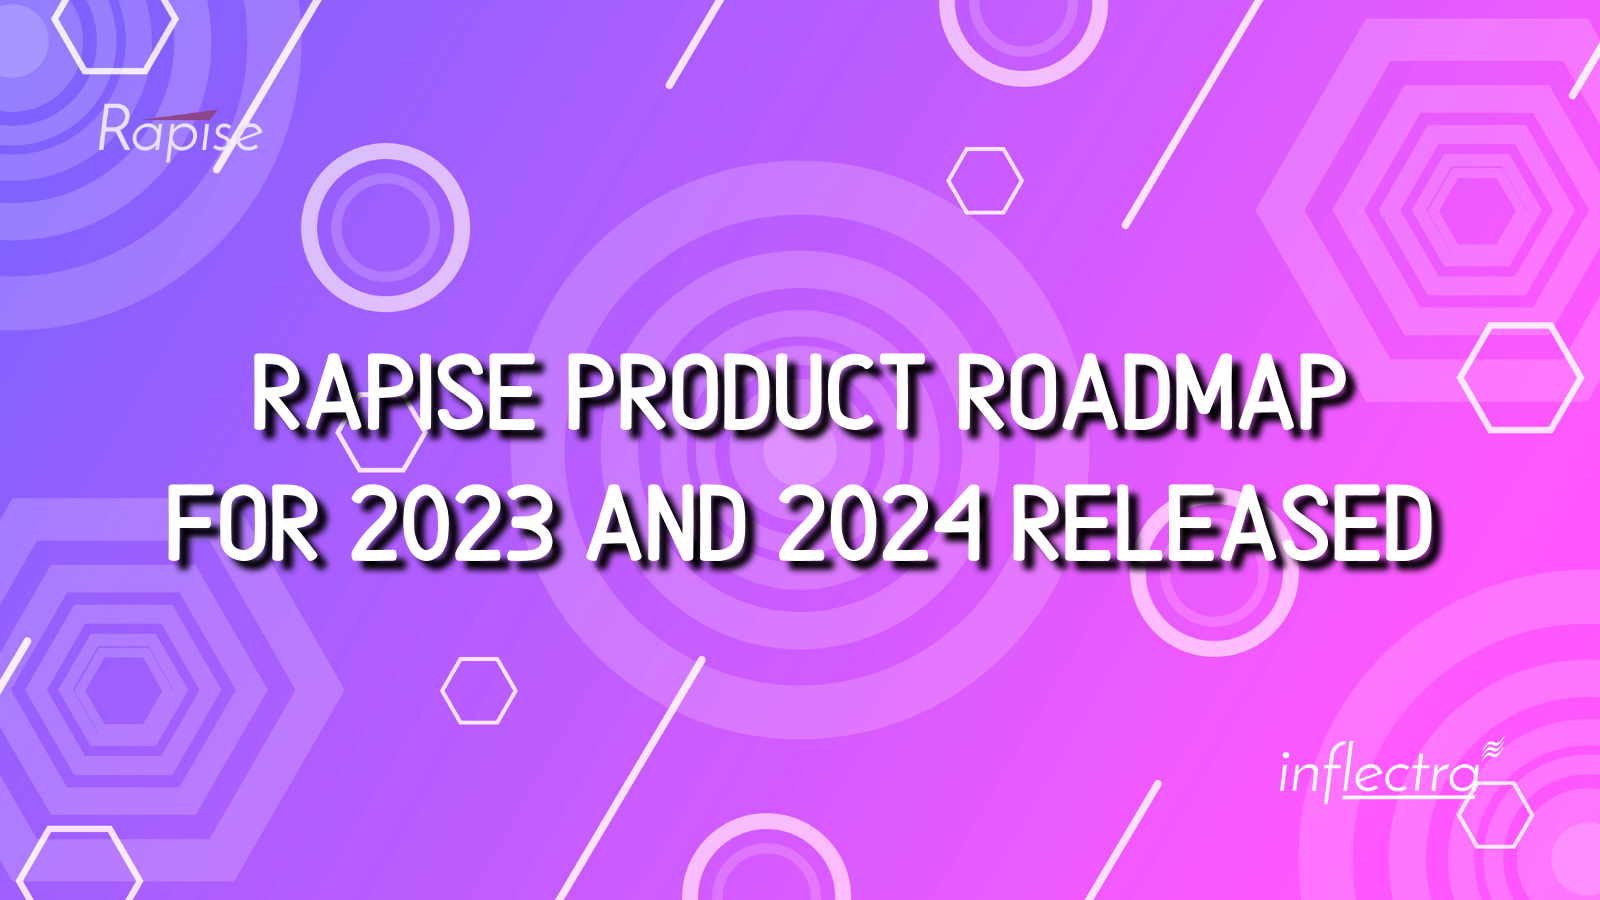 purple-background-white-text-inflectra-rapise-product-roadmap-released-image